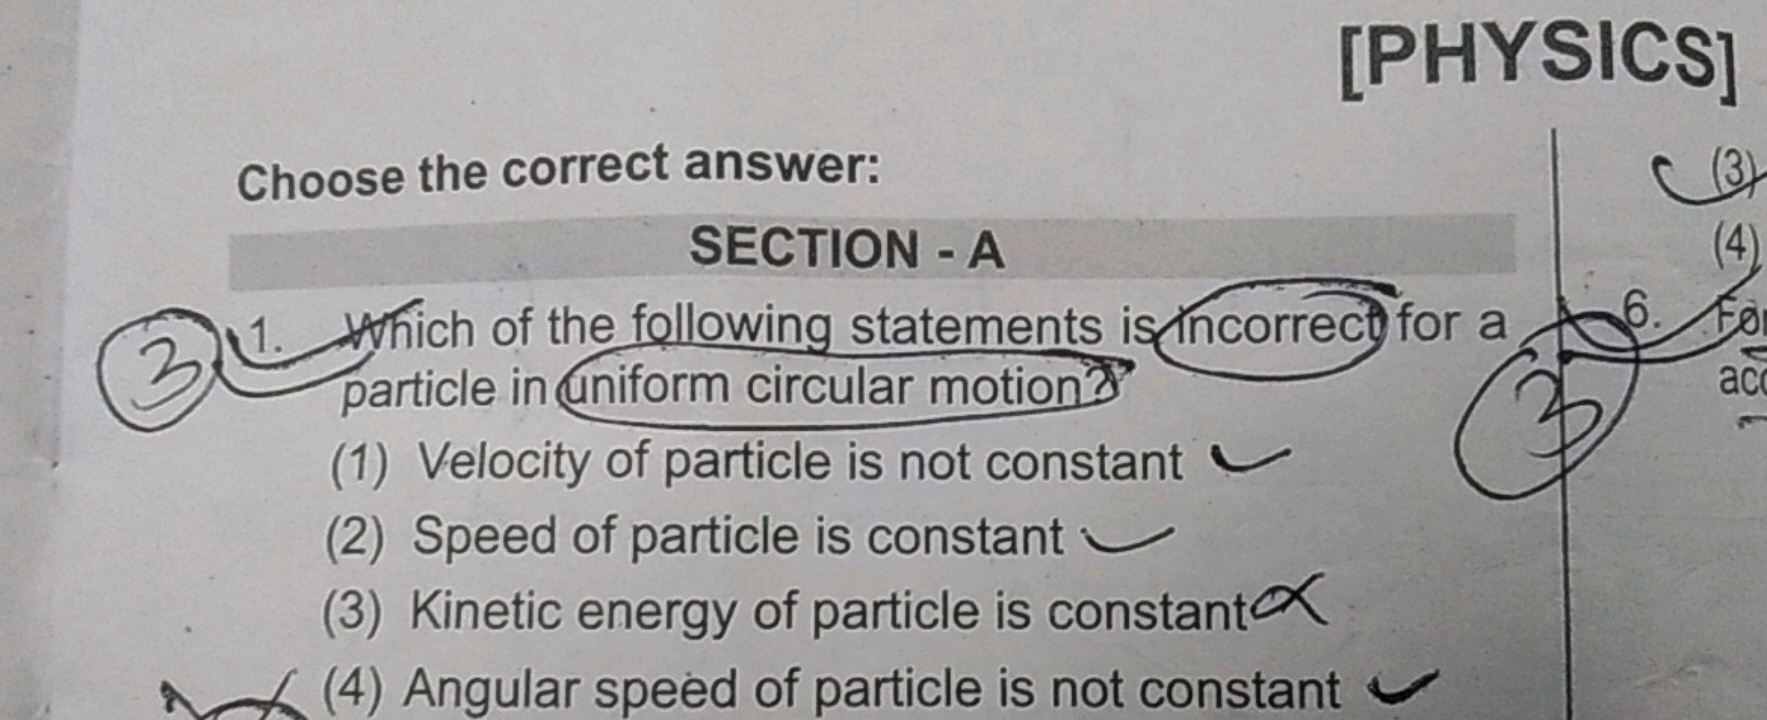 [PHYSICS] Choose the correct answer: SECTION - A 3.1. Which of the fol